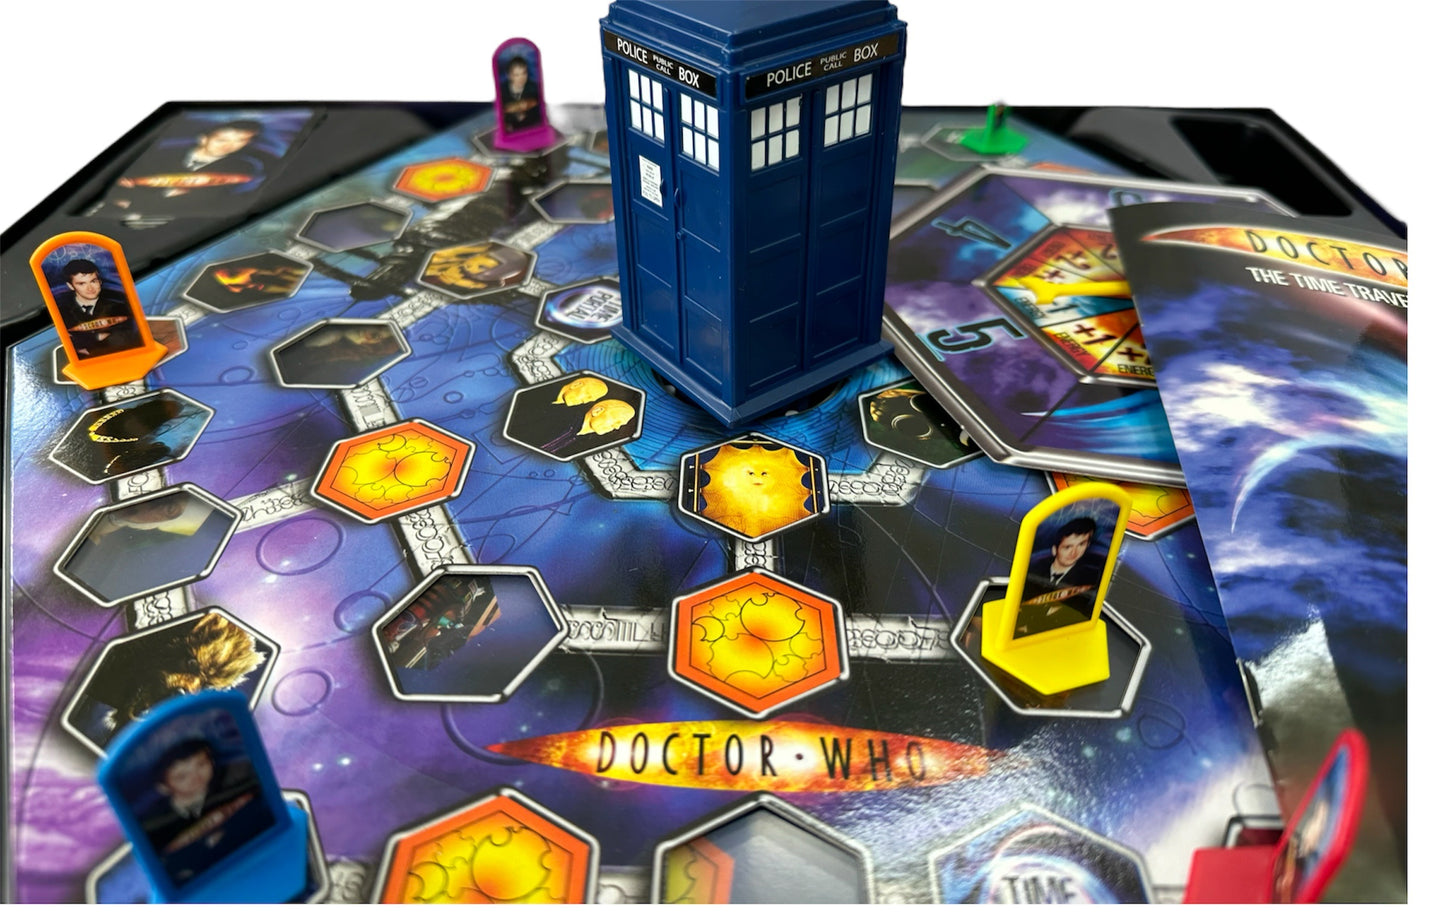 Vintage 2006 Doctor Dr Who The Time Travelling Action Board Game - Former Shop Counter Display Item